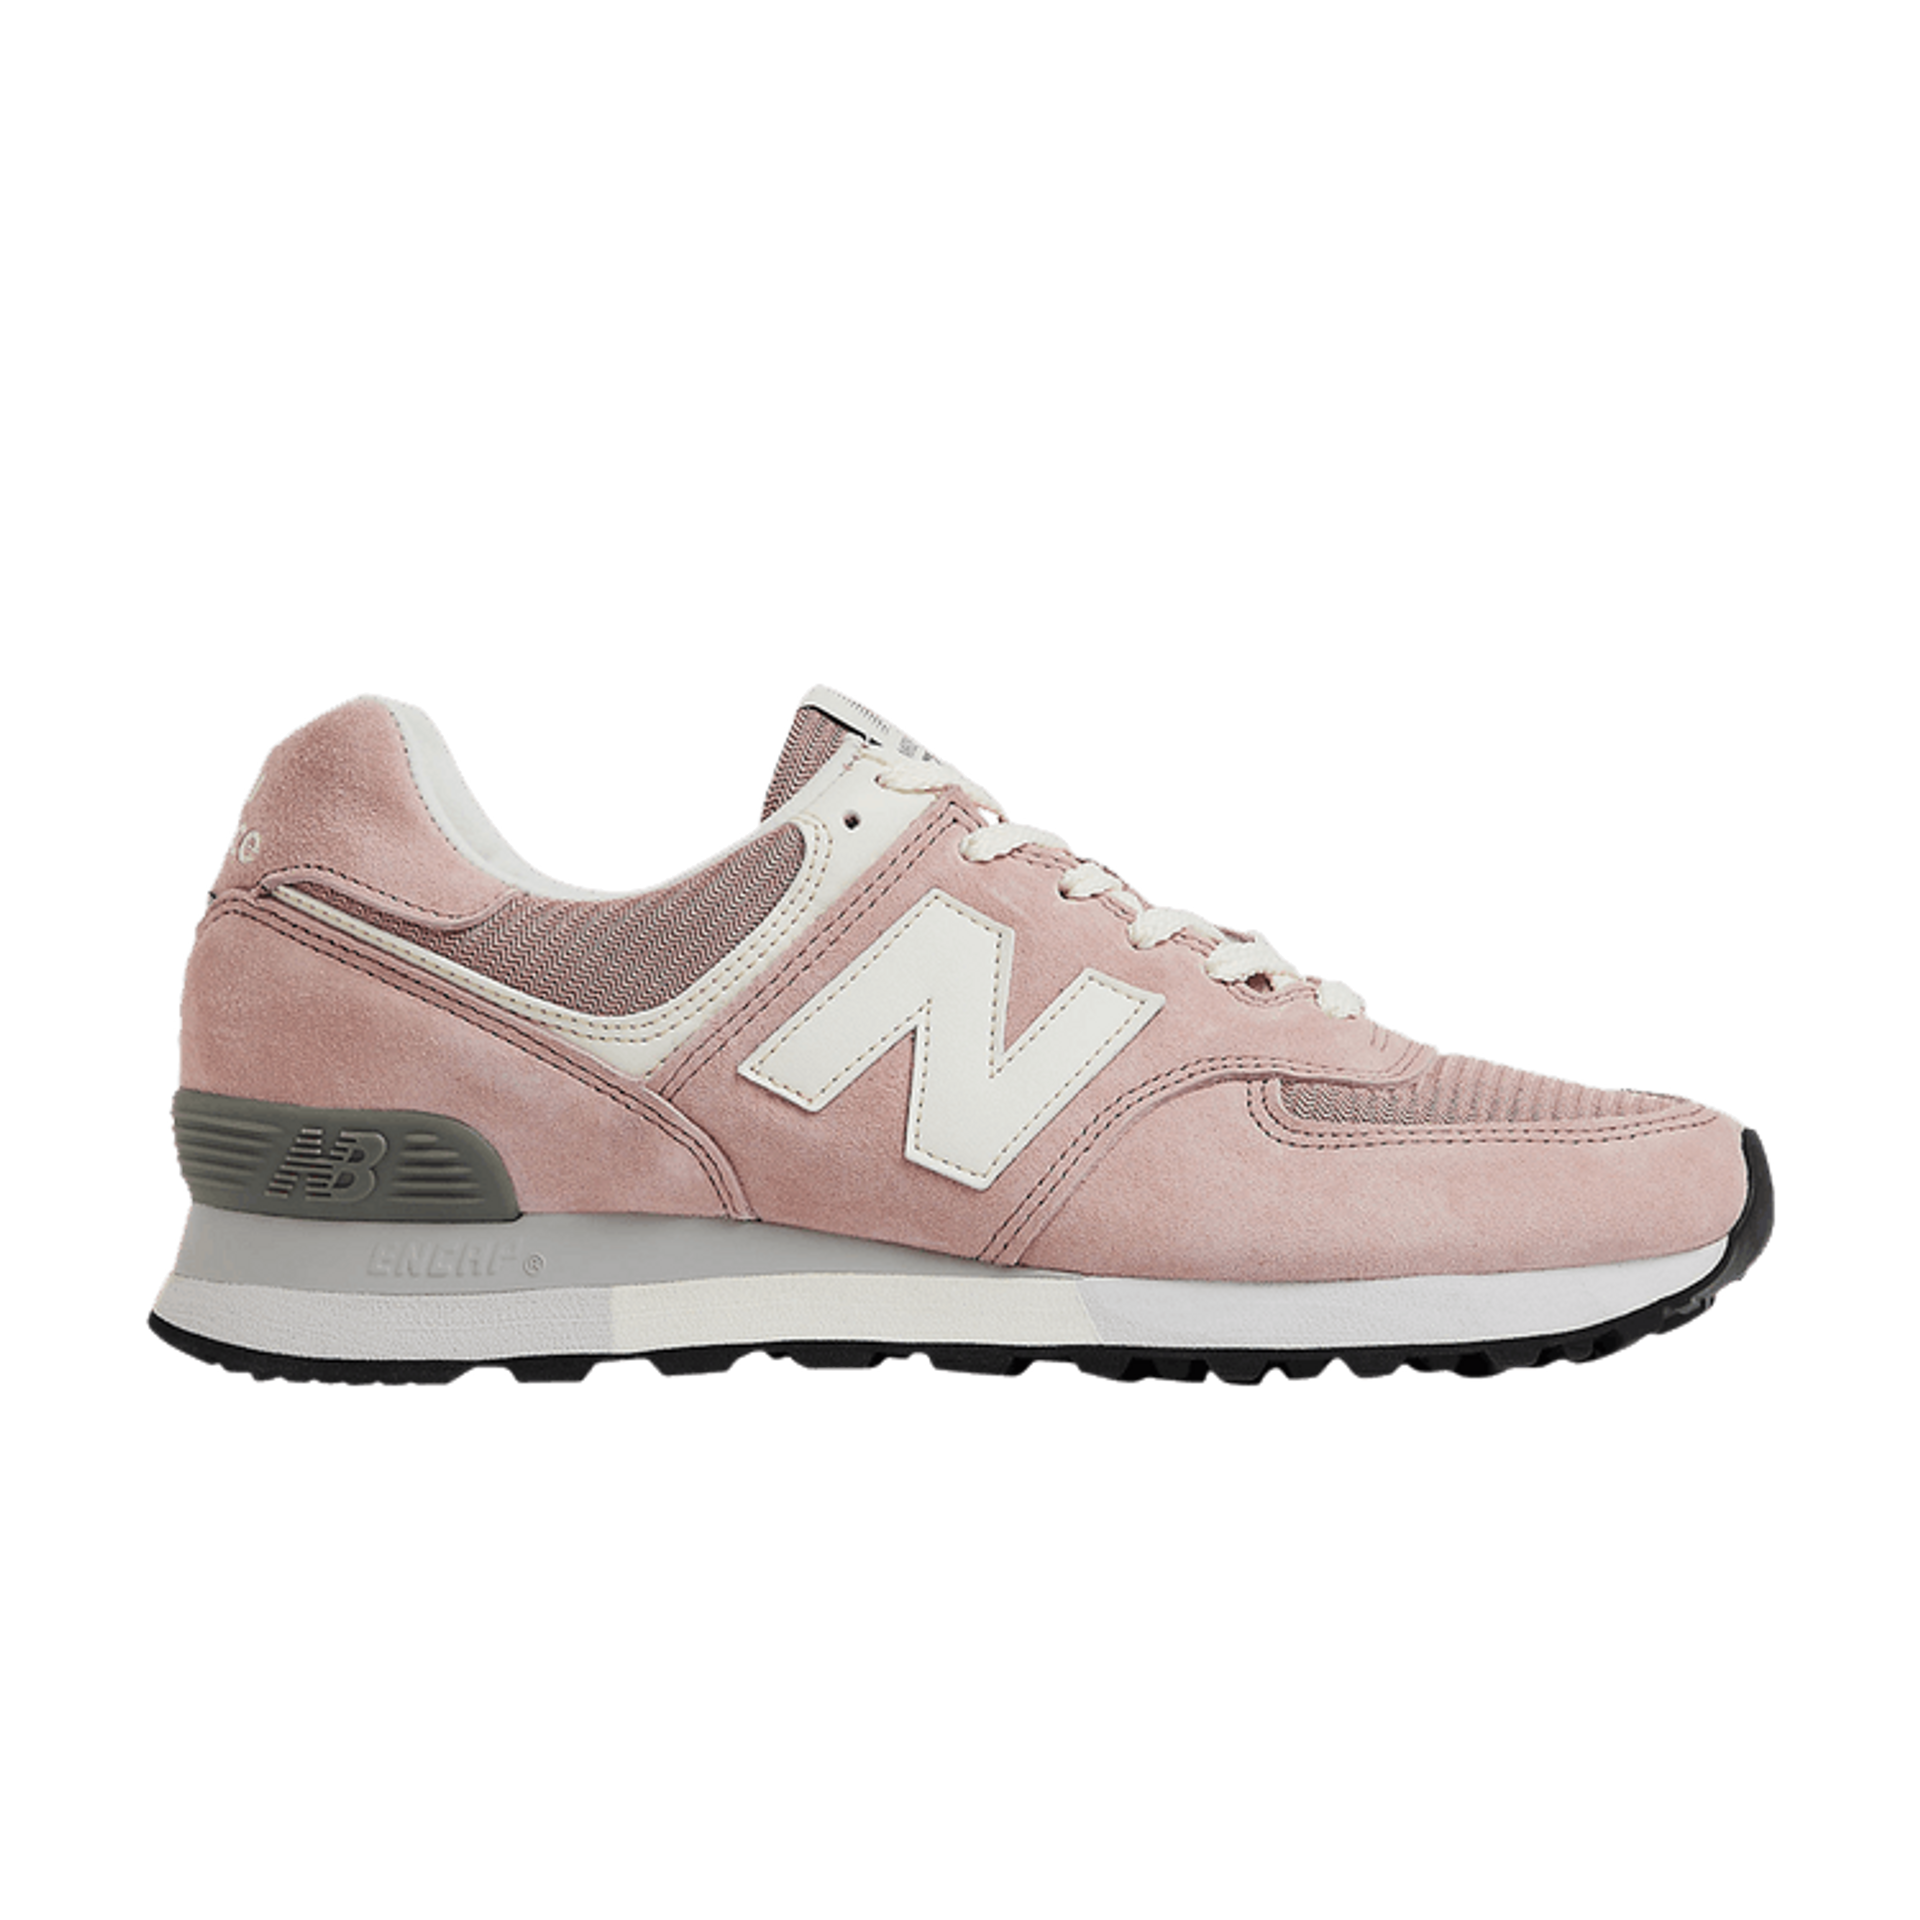 New Balance 576 Made in England 'Pale Mauve'